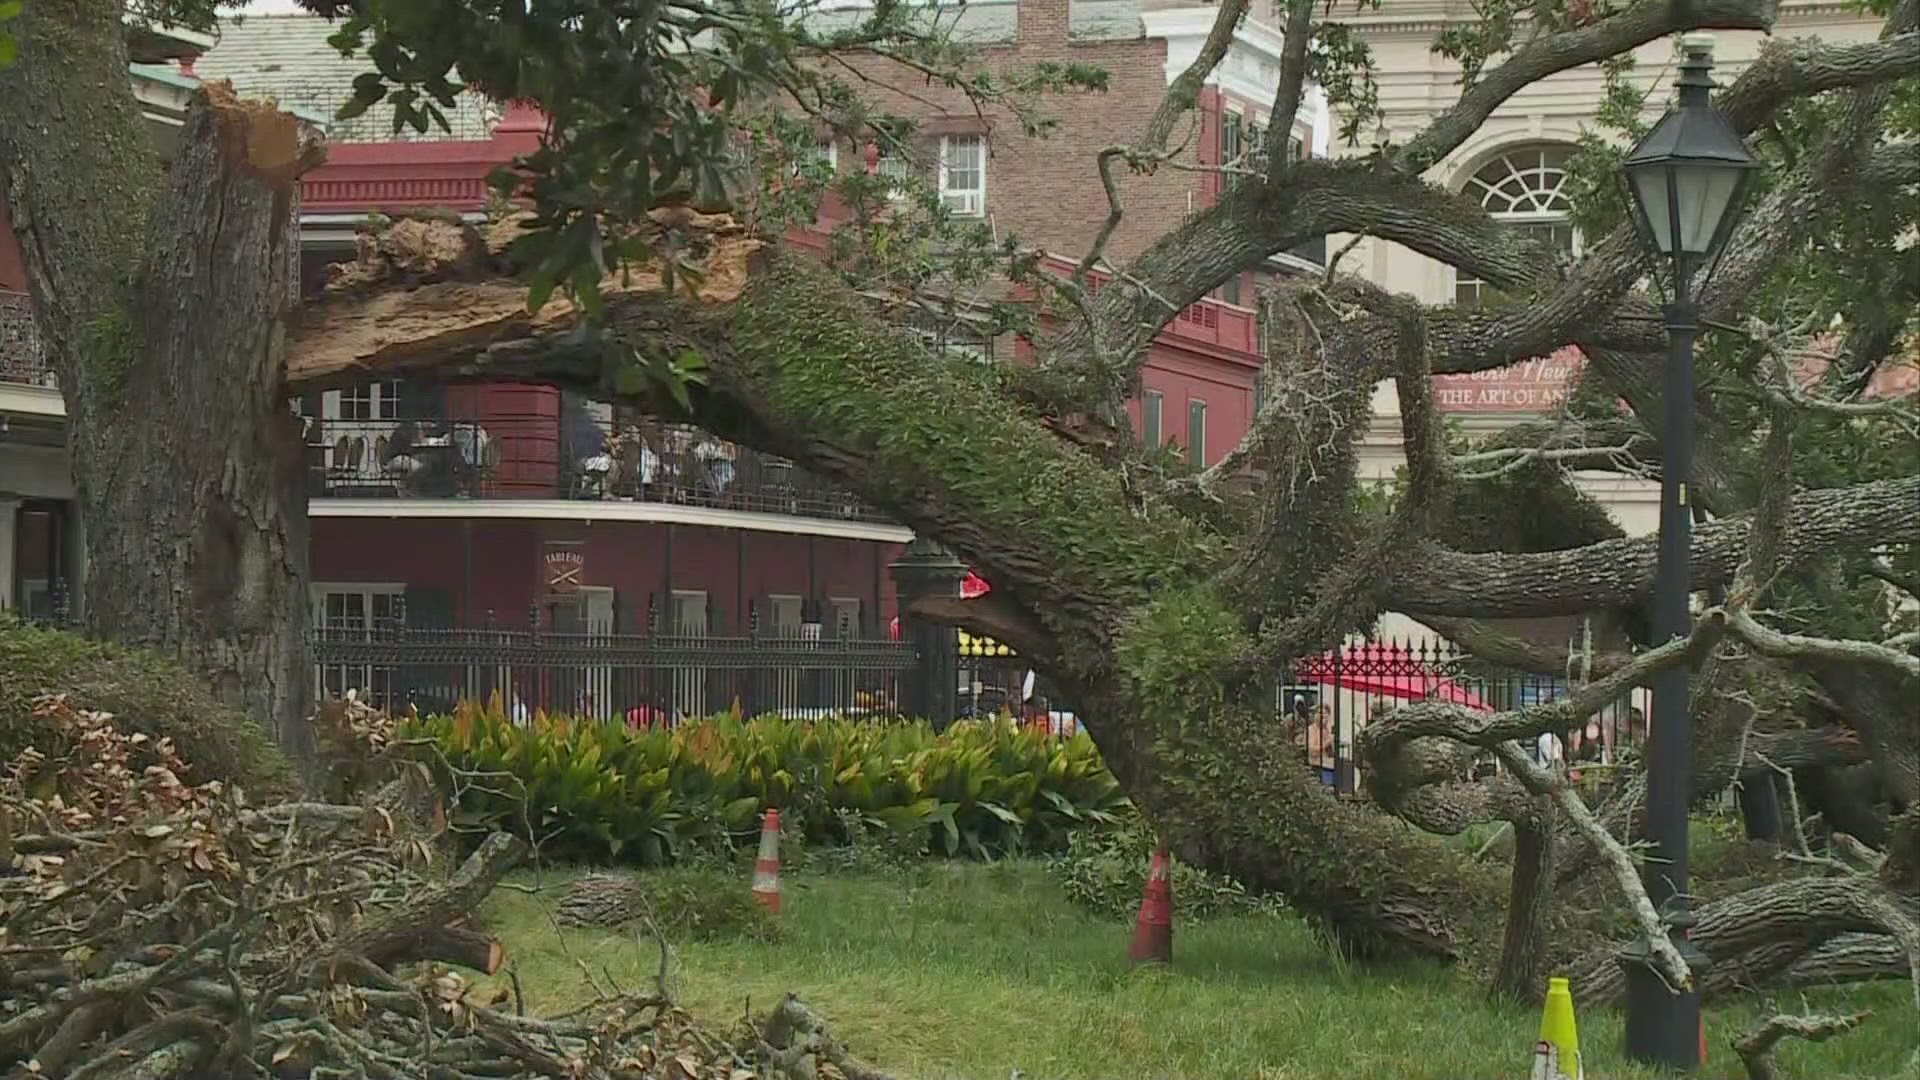 A large tree snapped in Jackson Square on Friday, critically injuring a teen who was rushed to the hospital.